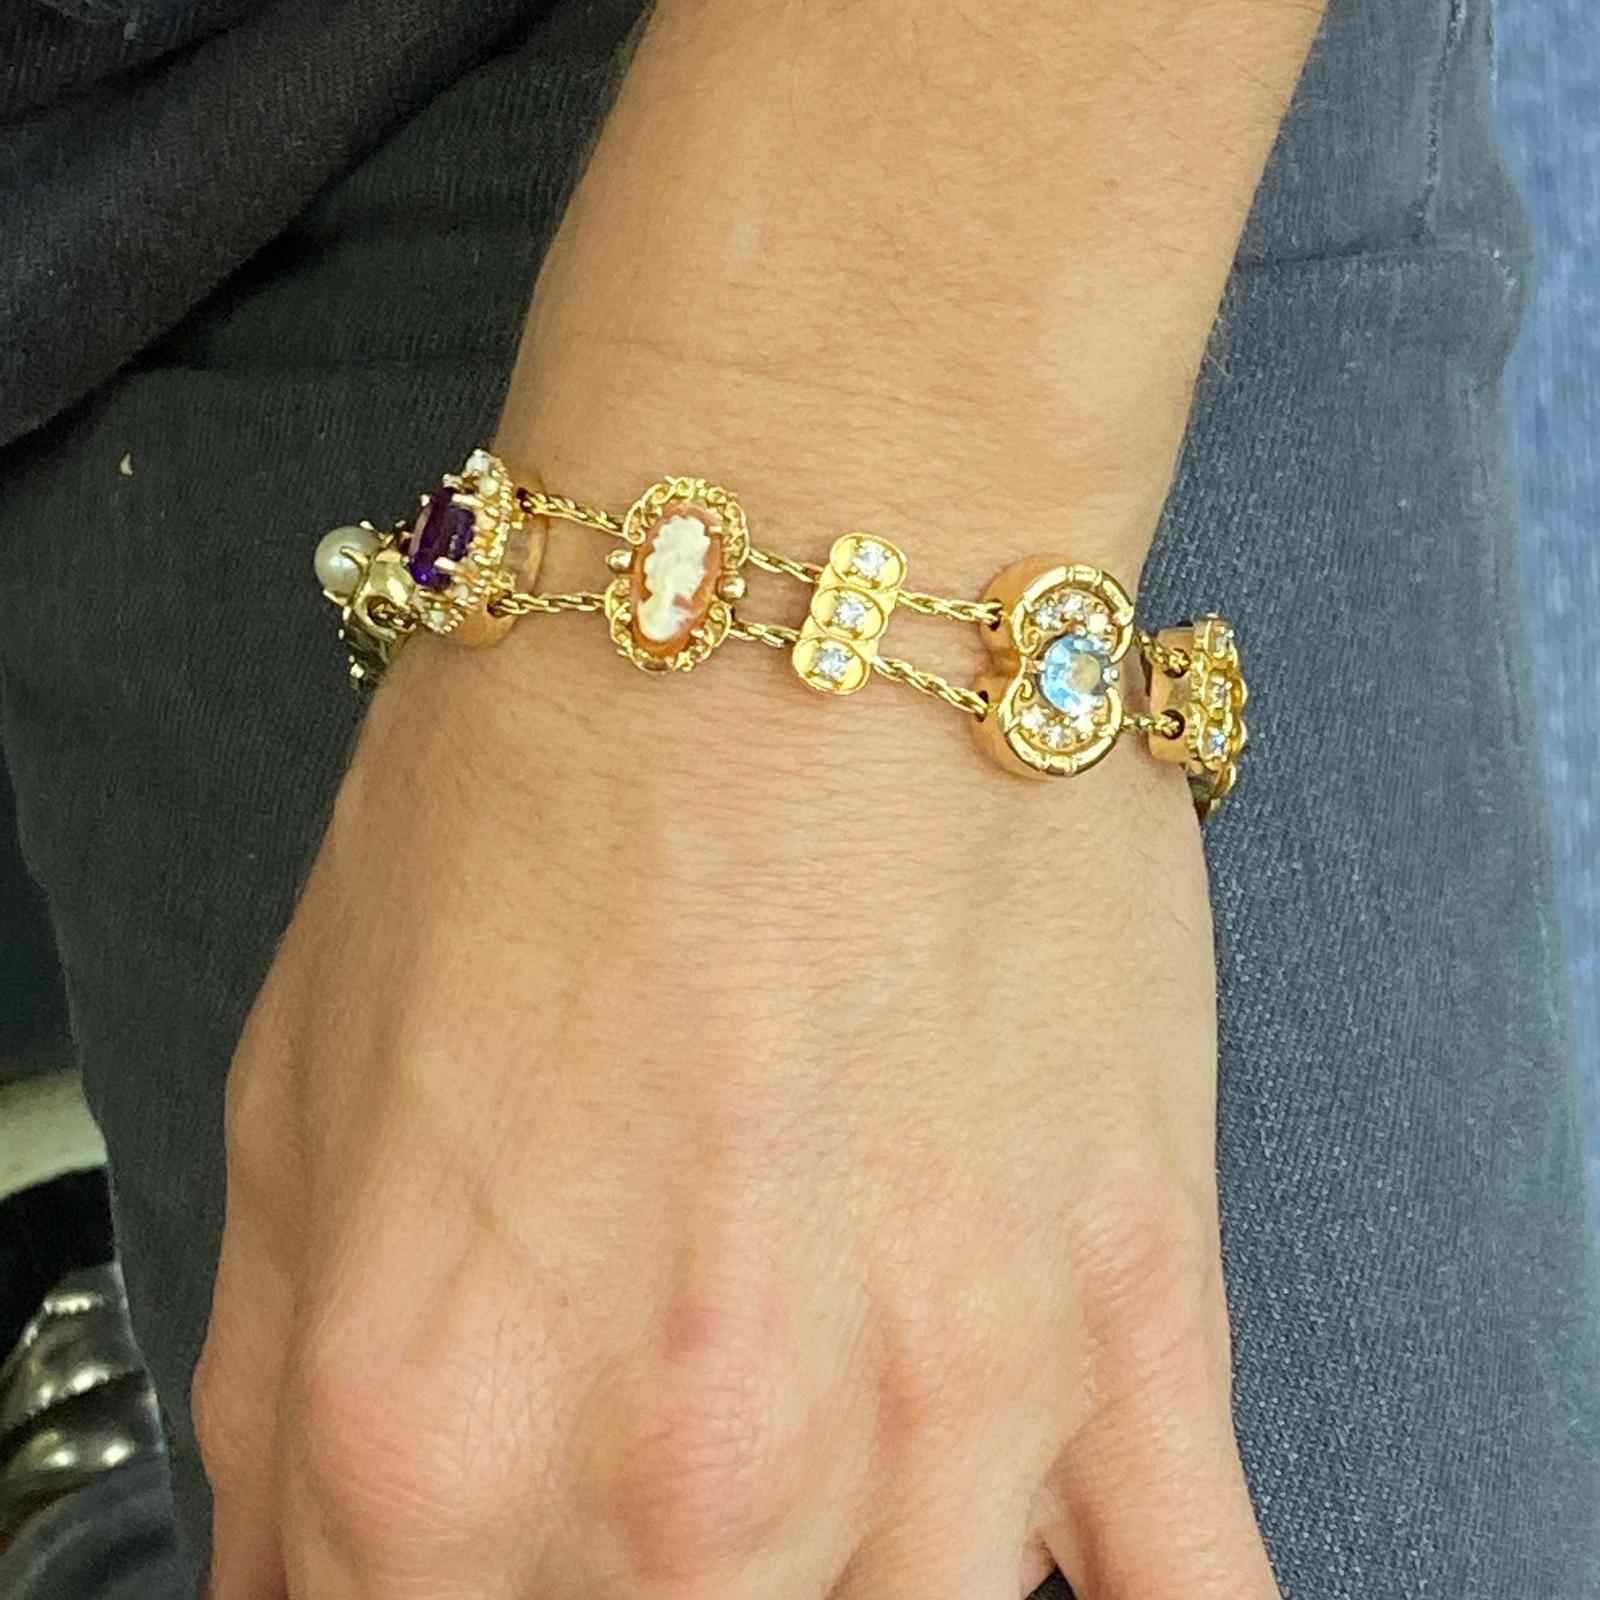 Vintage slide bracelet fashioned in 14 karat yellow gold. The bracelet features slides containing 12 round brilliant cut diamonds throughout weighing .50 carat total weight,  as well as amethyst, opal, emerald, ruby, and sapphire gemstones. The